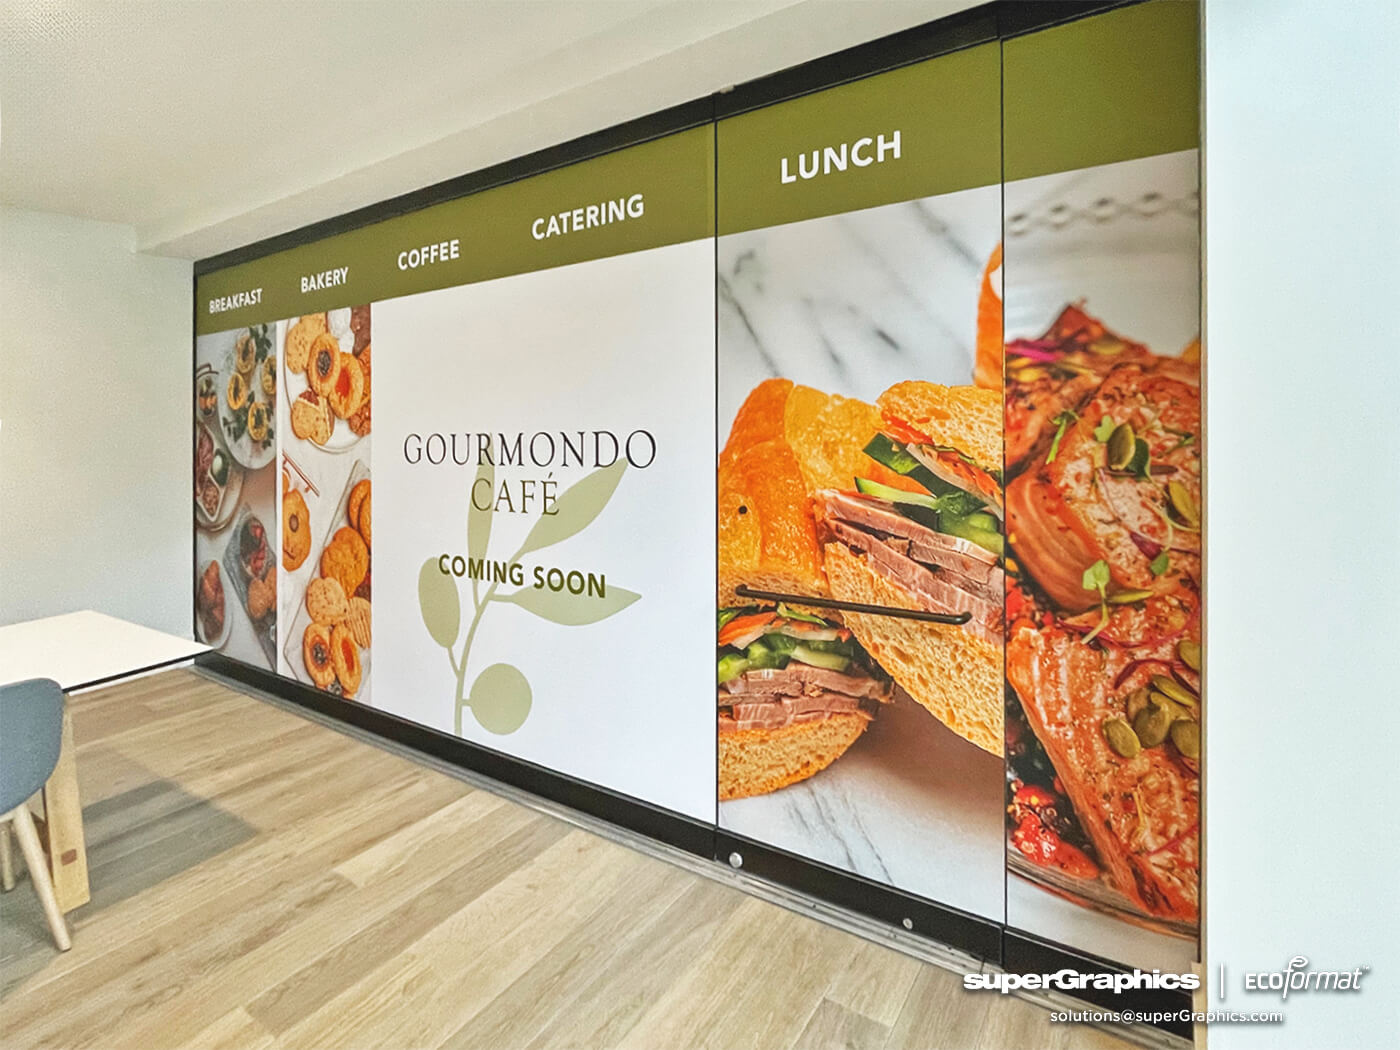 Indoor promotional graphics for Gourmondo Café's new location in Seattle.